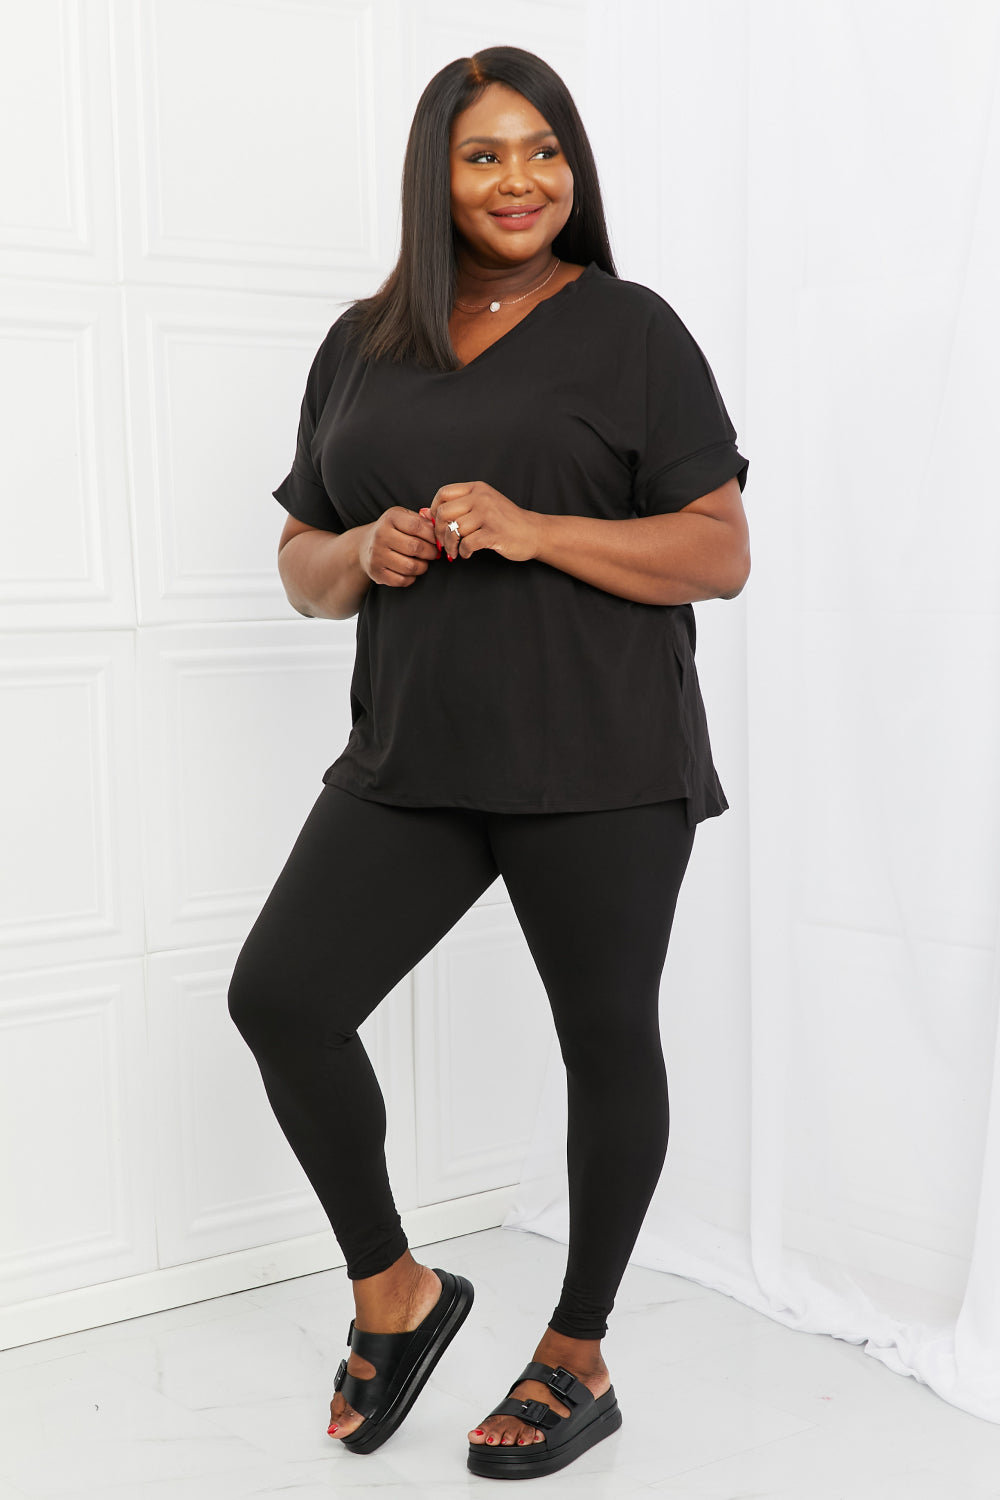 Self Love Full Size Brushed DTY Microfiber Lounge Set in Black - Women’s Clothing & Accessories - Shirts & Tops - 4